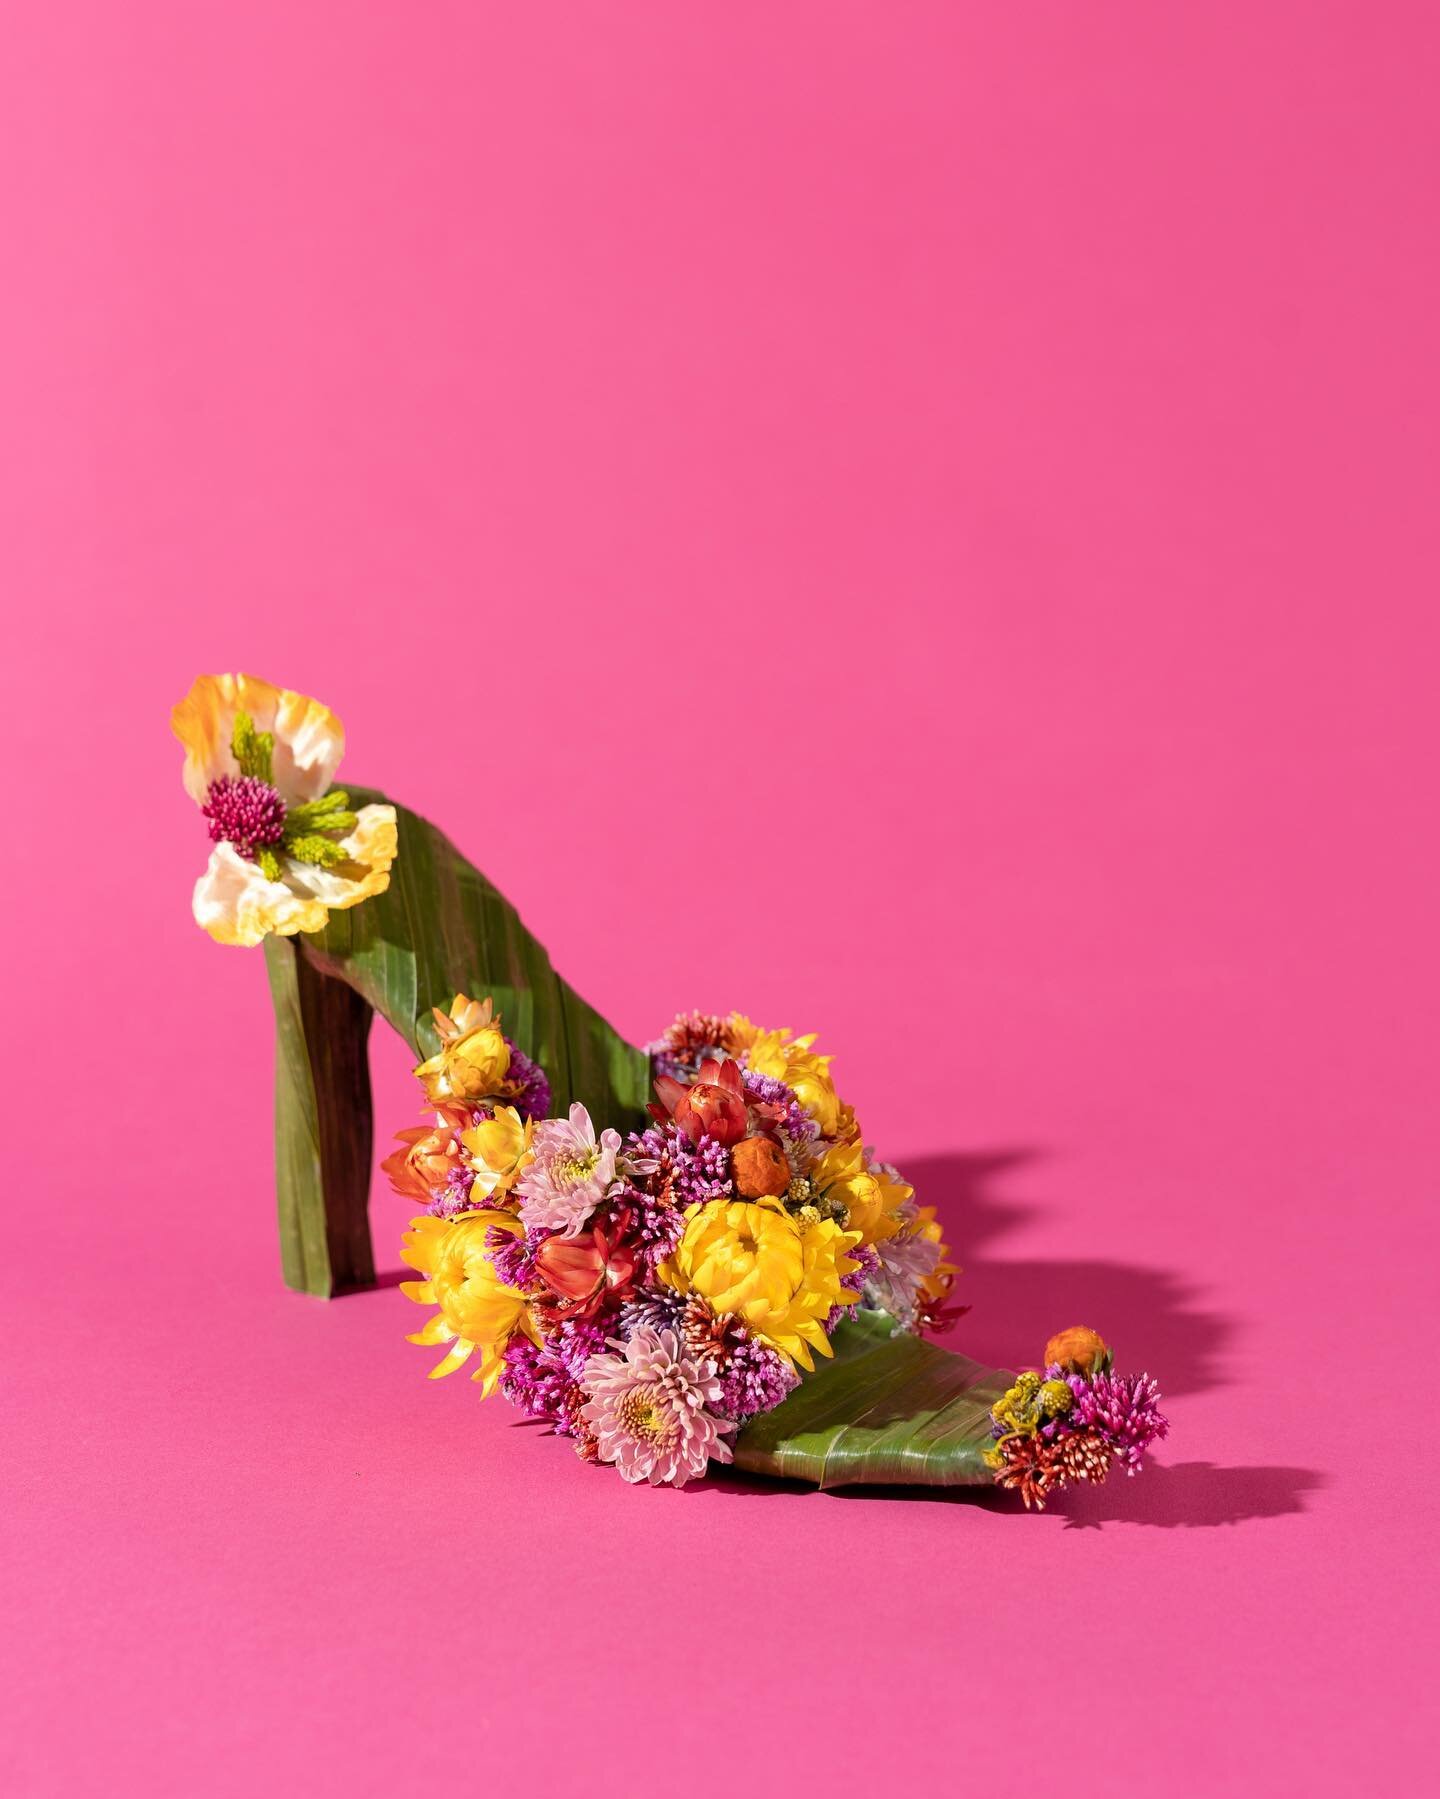 &quot;Walking in her shoes&quot;. A beautiful personal project and inspired collaboration in bloom. Born out of a need to clear some creative cobwebs, dig in, move some energy and bring out the color of self expression.

Who can relate?

Amazing flor